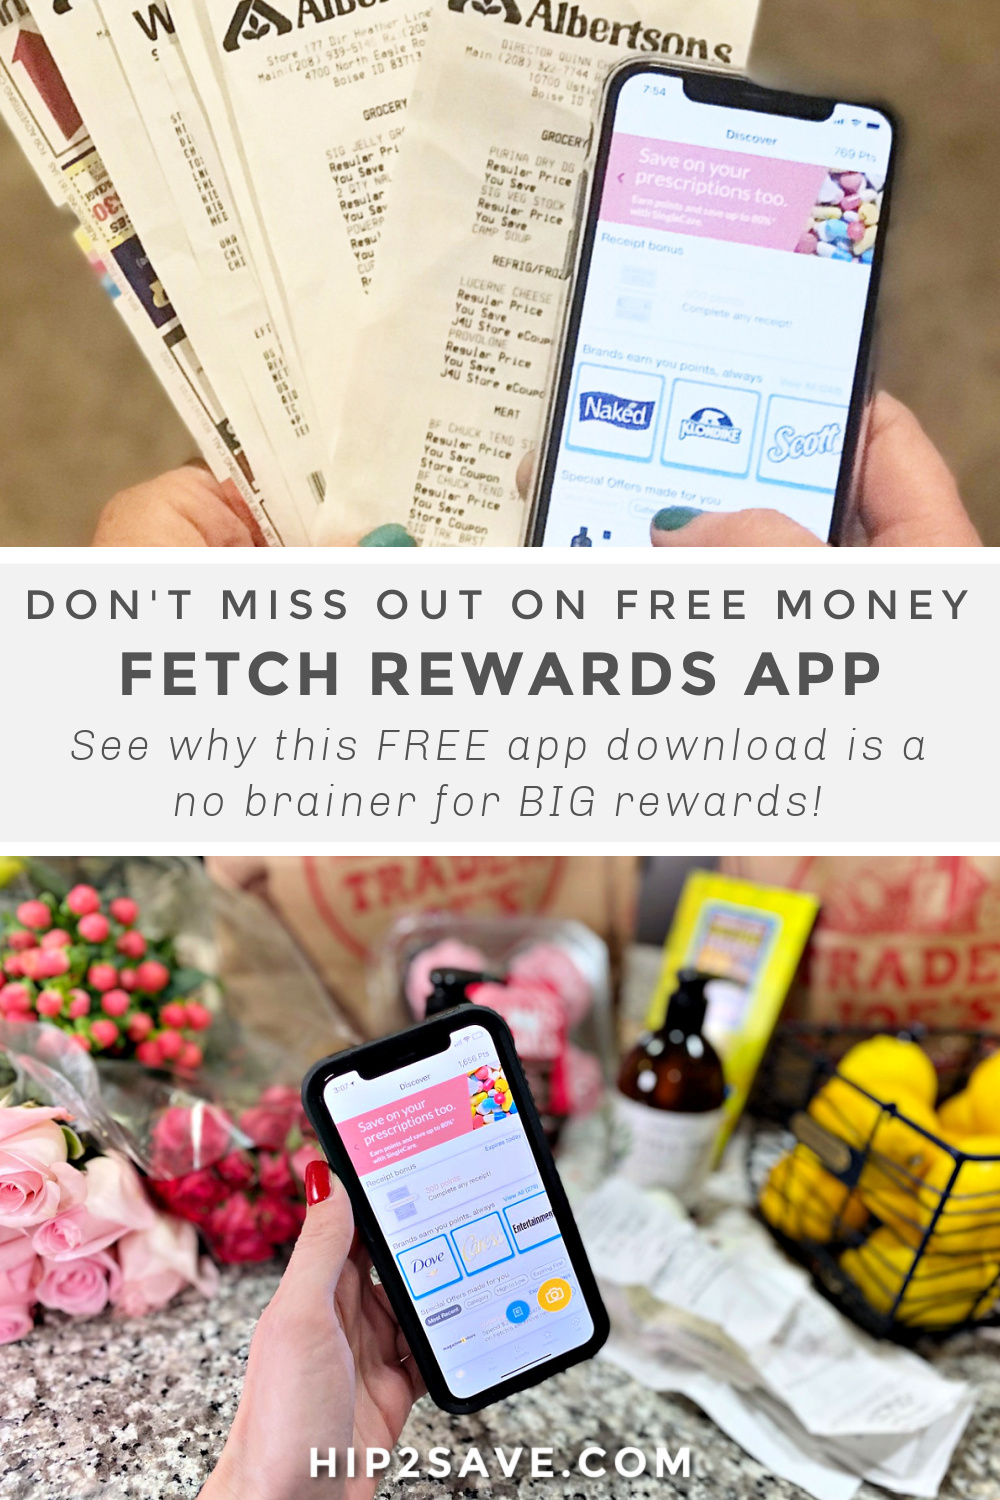 how to get free points on fetch rewards without receipt